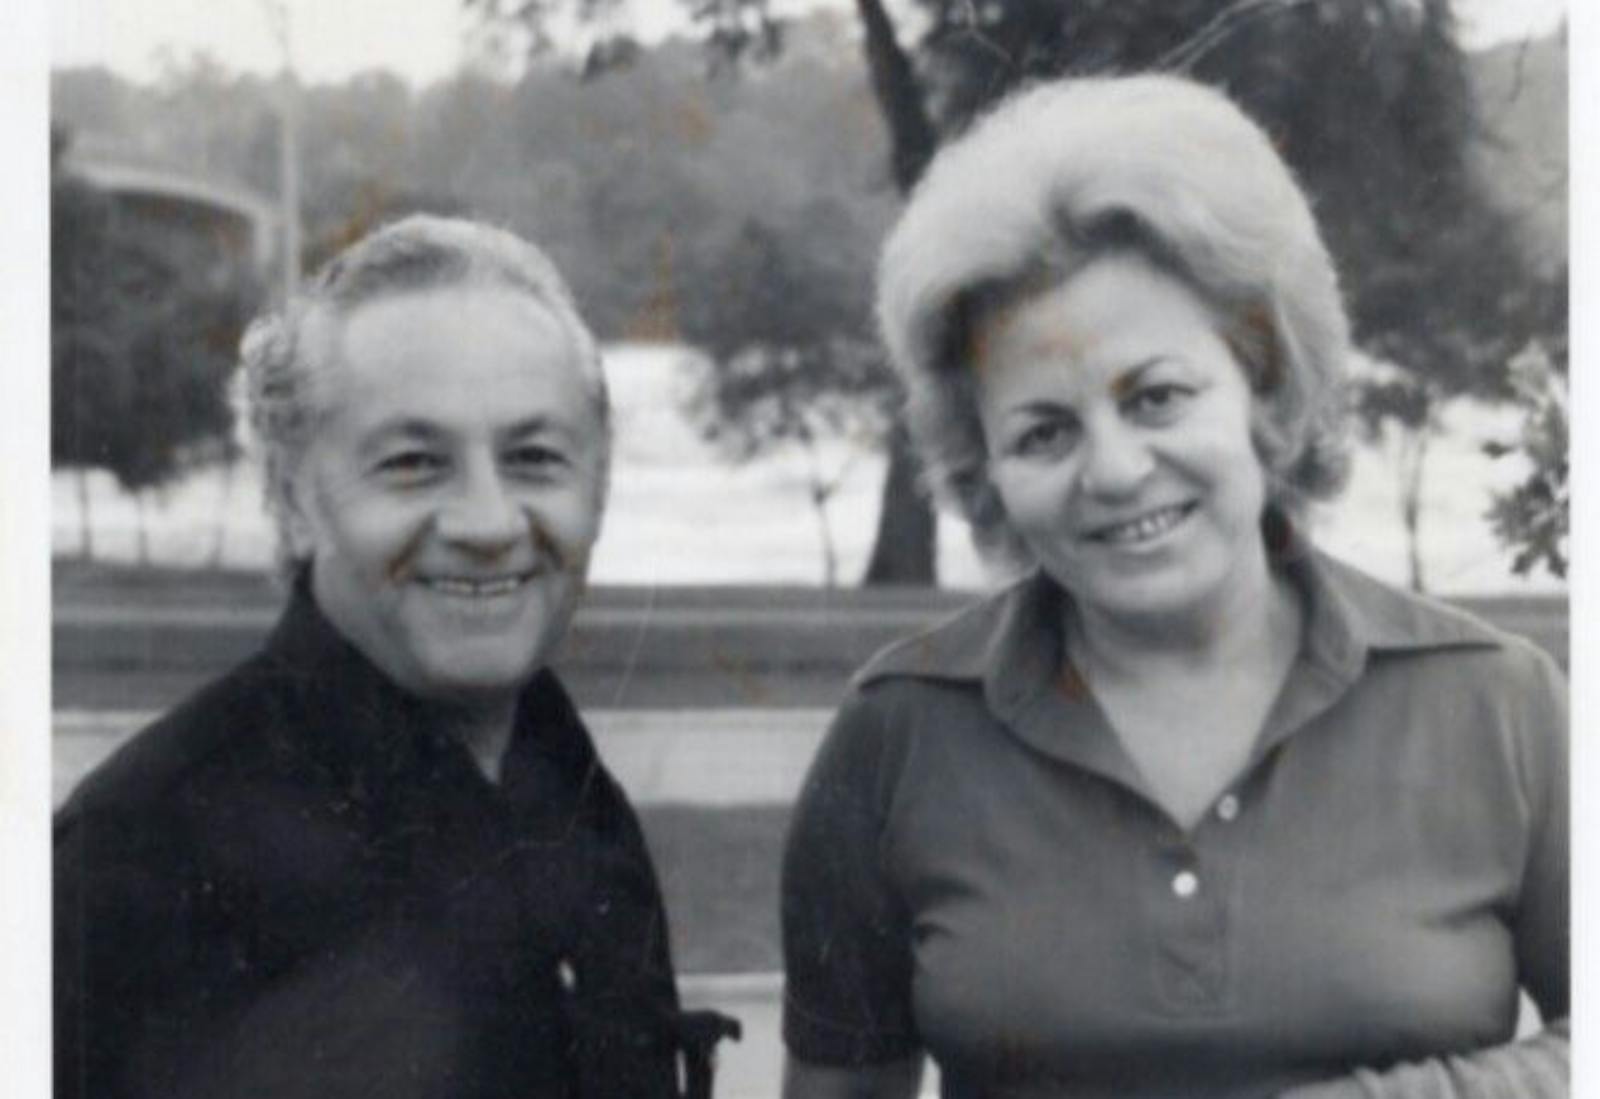 Cammy's parents in Israel in the 1970s.